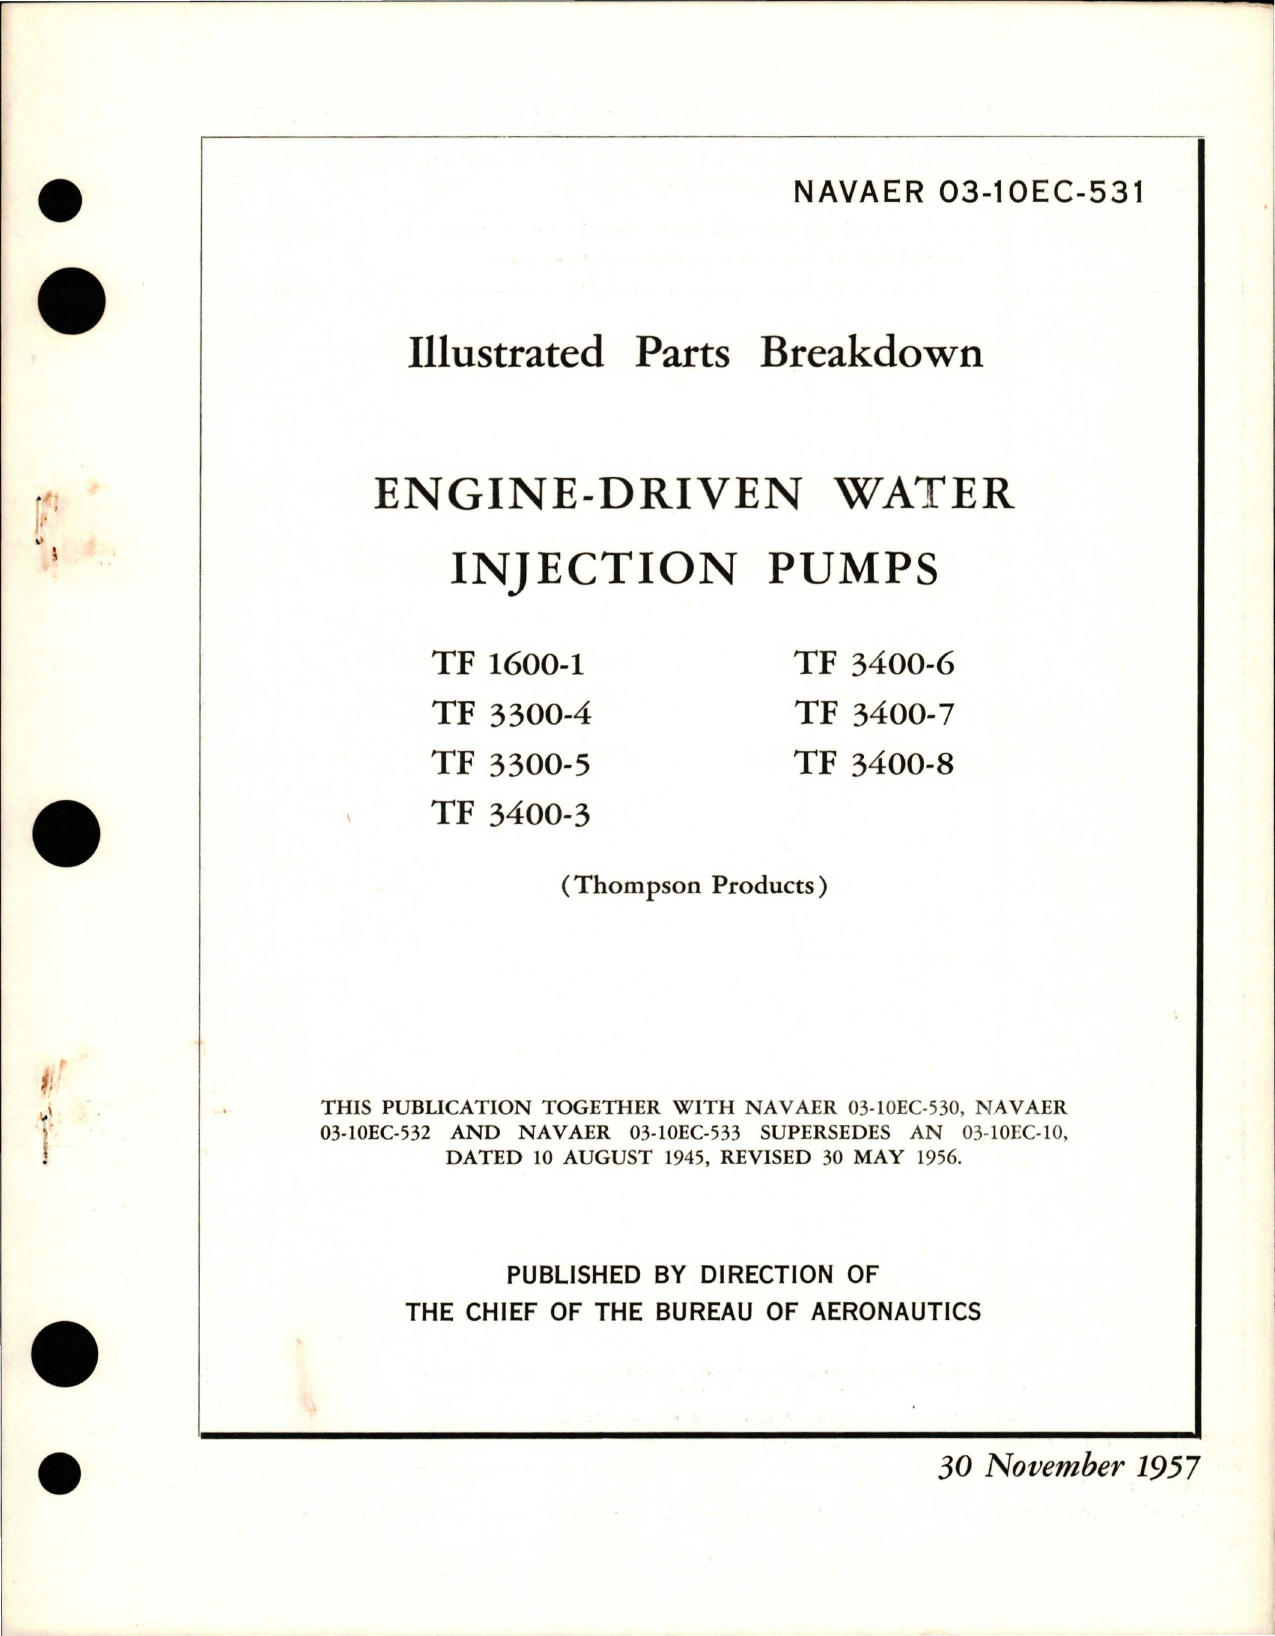 Sample page 1 from AirCorps Library document: Illustrated Parts Breakdown for Engine Driven Water Injection Pumps